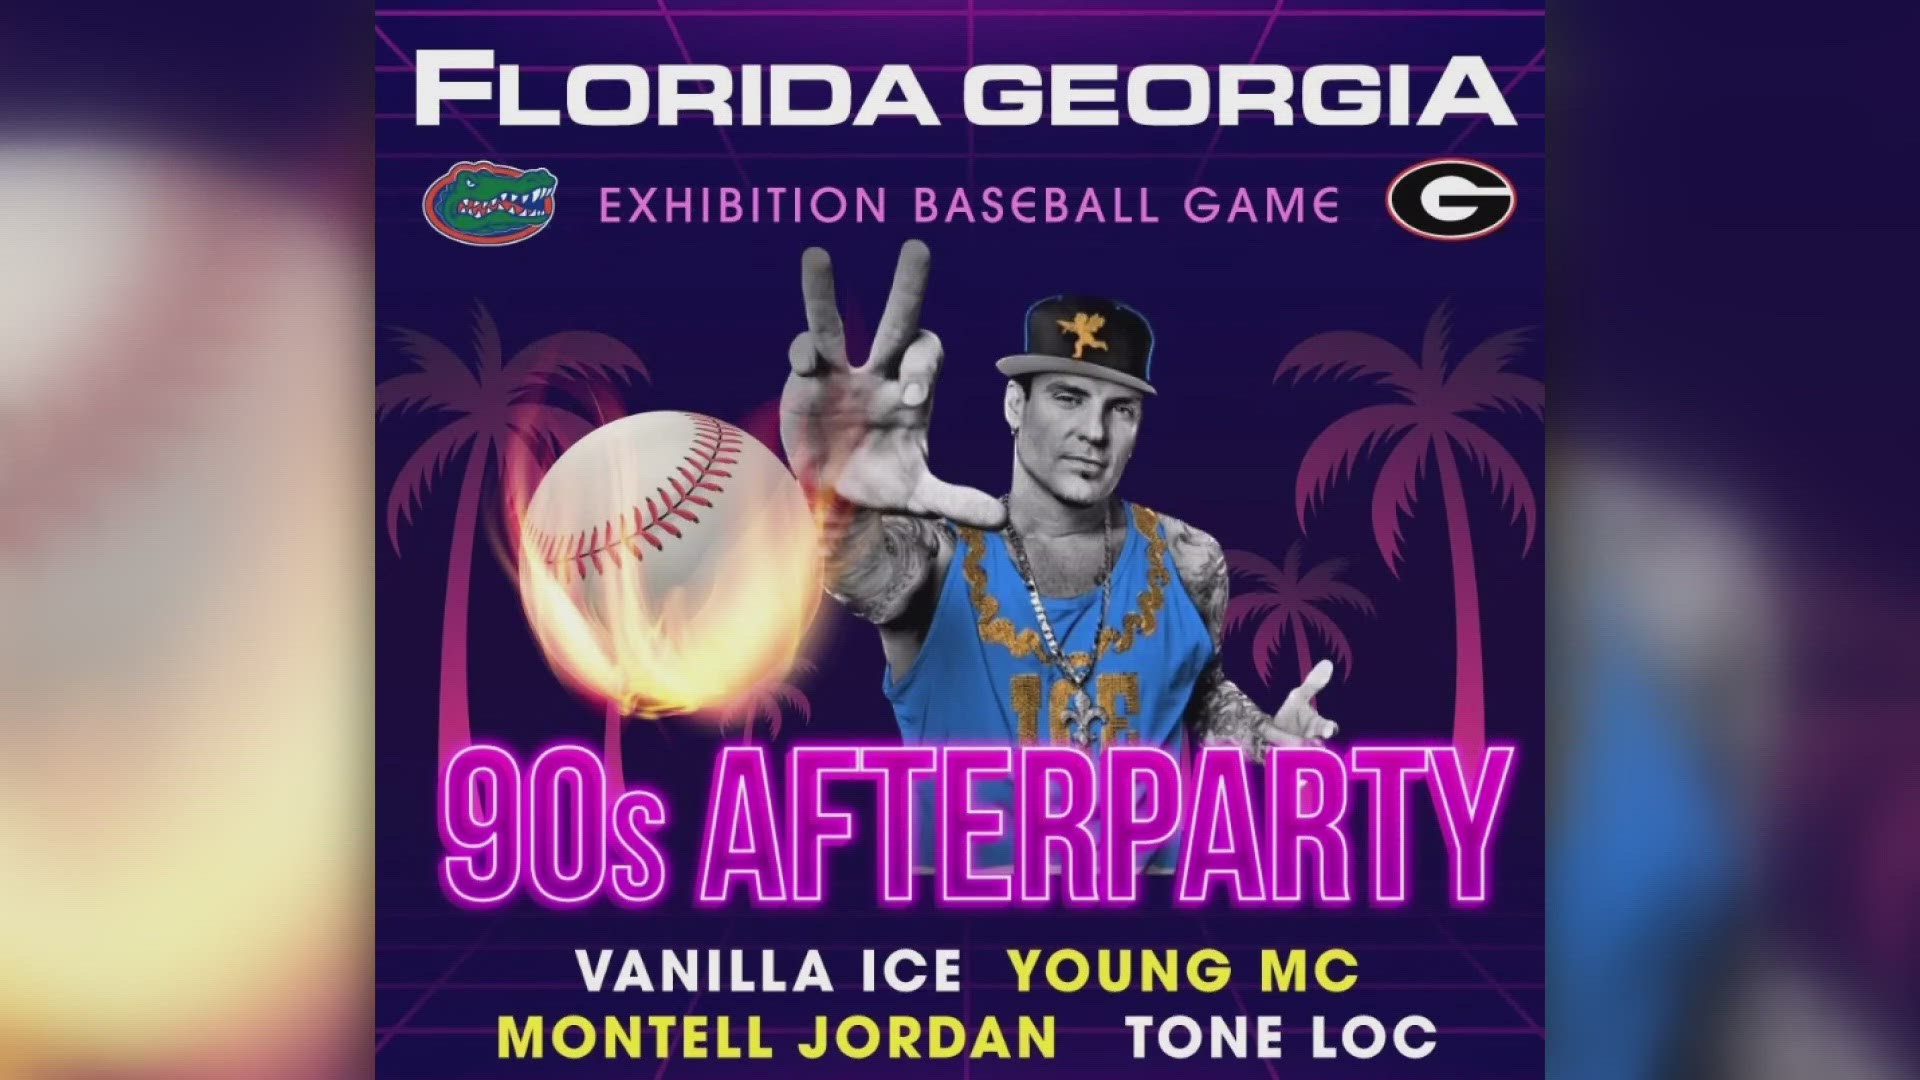 The 90s-themed concert will be on-field at 121 Financial Ballpark following the Florida-Georgia exhibition baseball game Friday night.